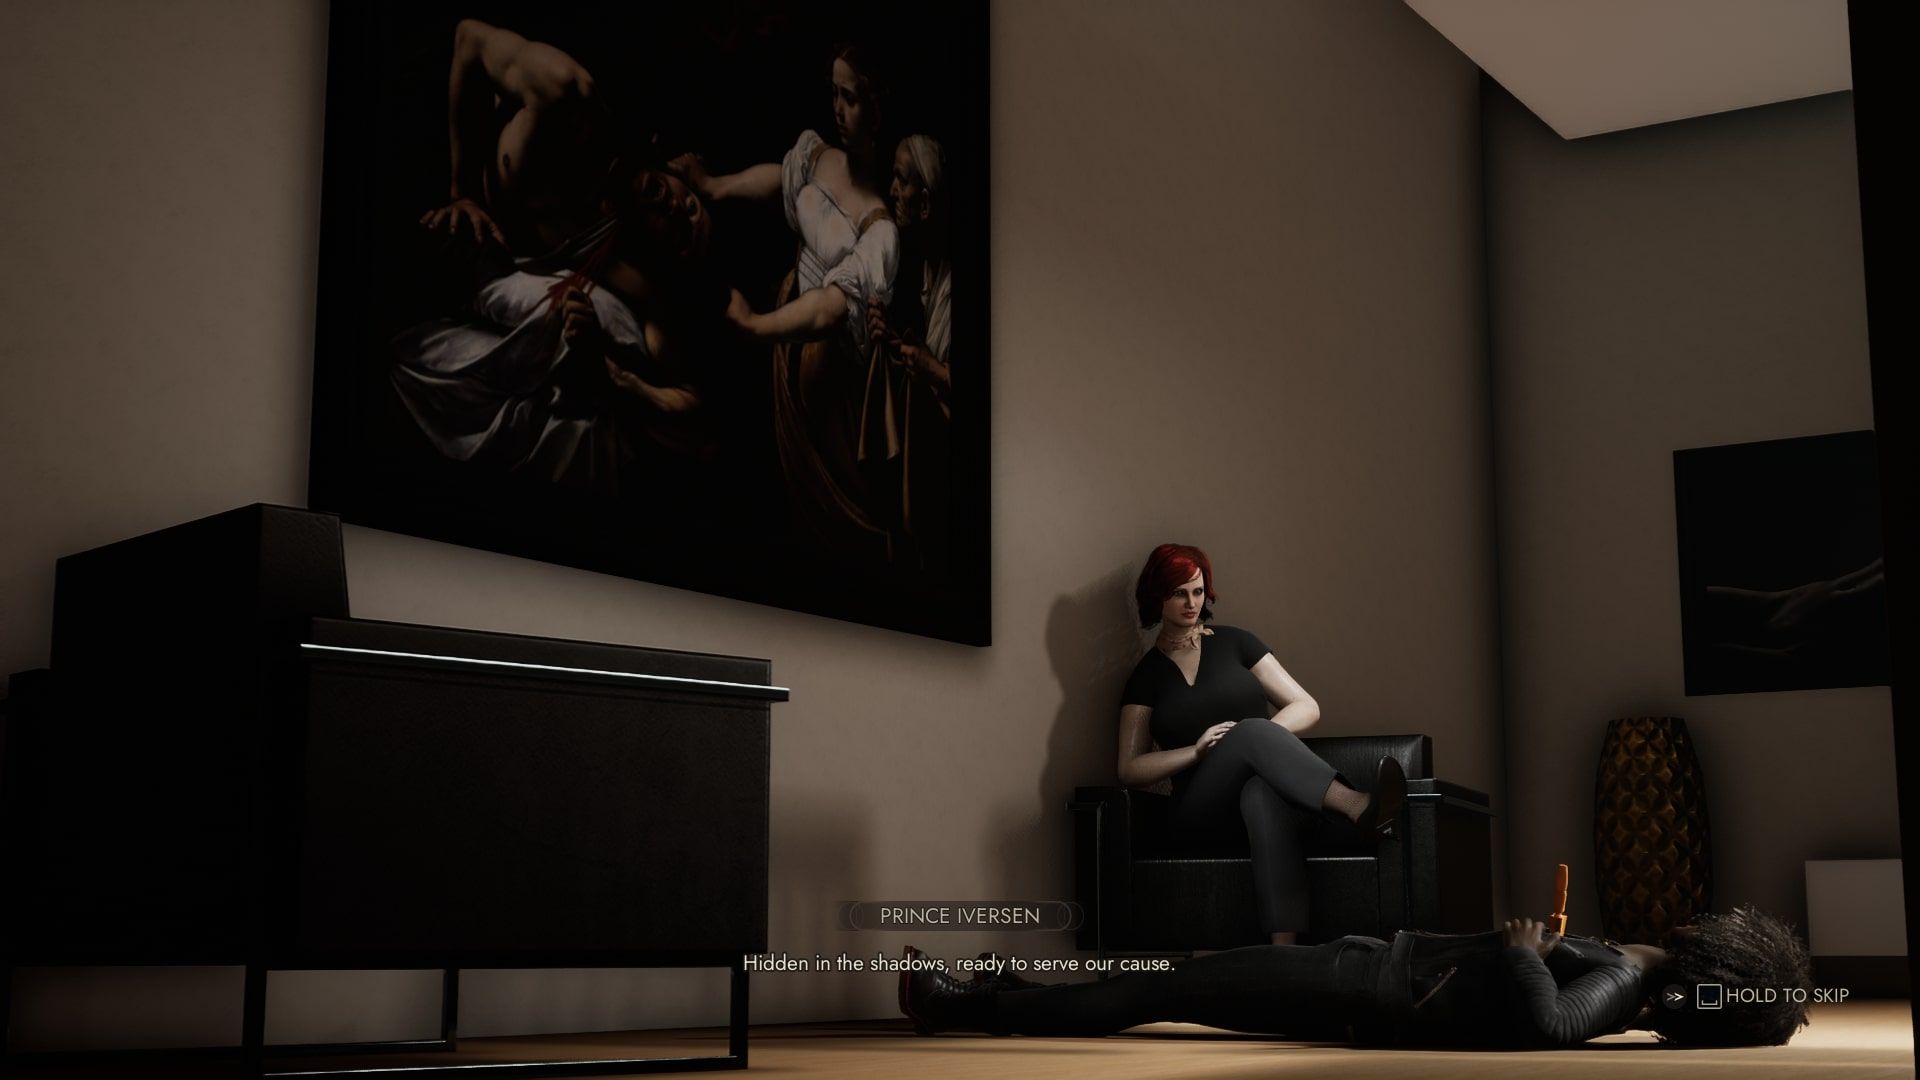 Vampire: The Masquerade - Swansong - Hilda sitting on a chair with Emem on the floor, staked.